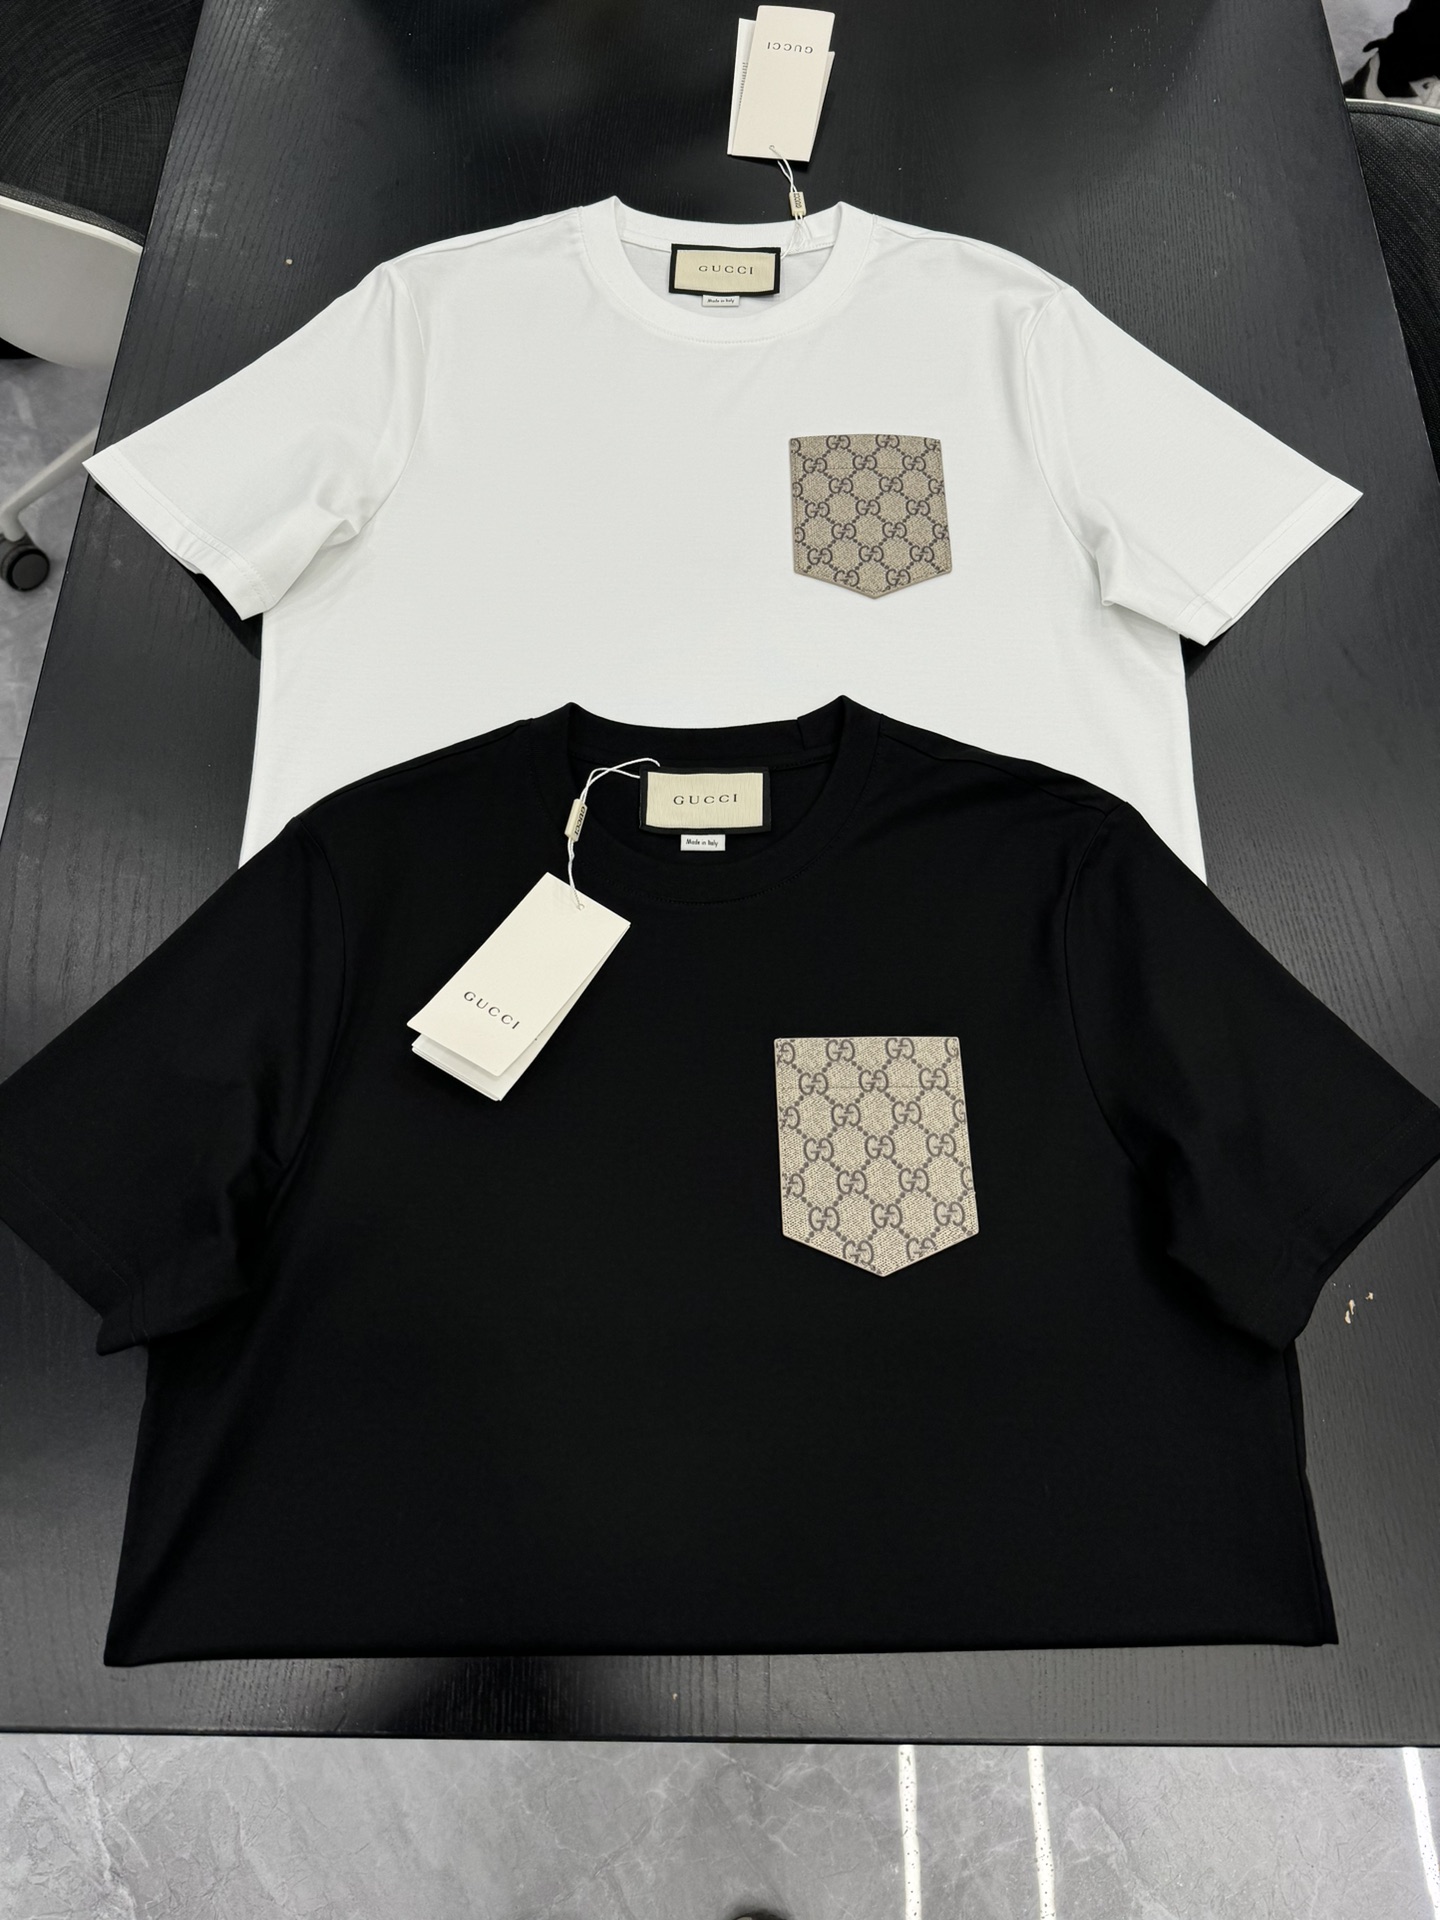 Gucci New
 Clothing T-Shirt Black White Cotton Mercerized Spring/Summer Collection